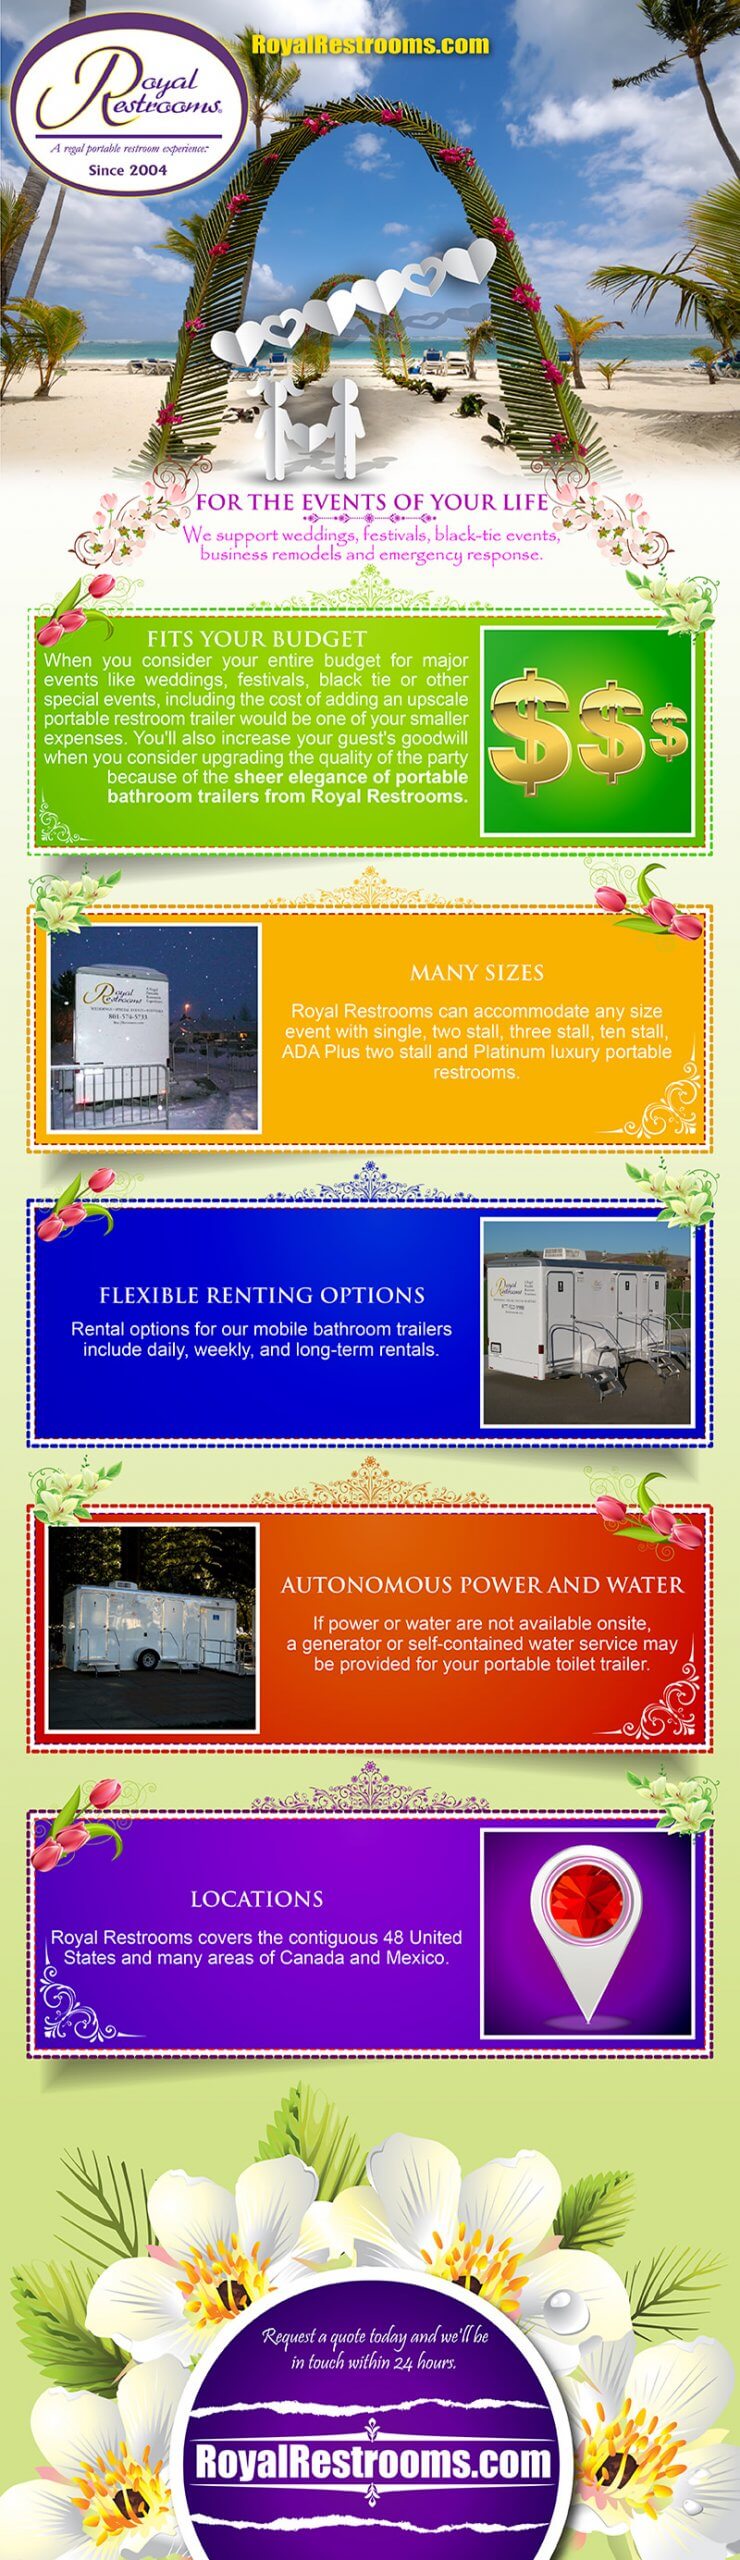 Luxury Portable Restrooms by Royal Restrooms Infographic